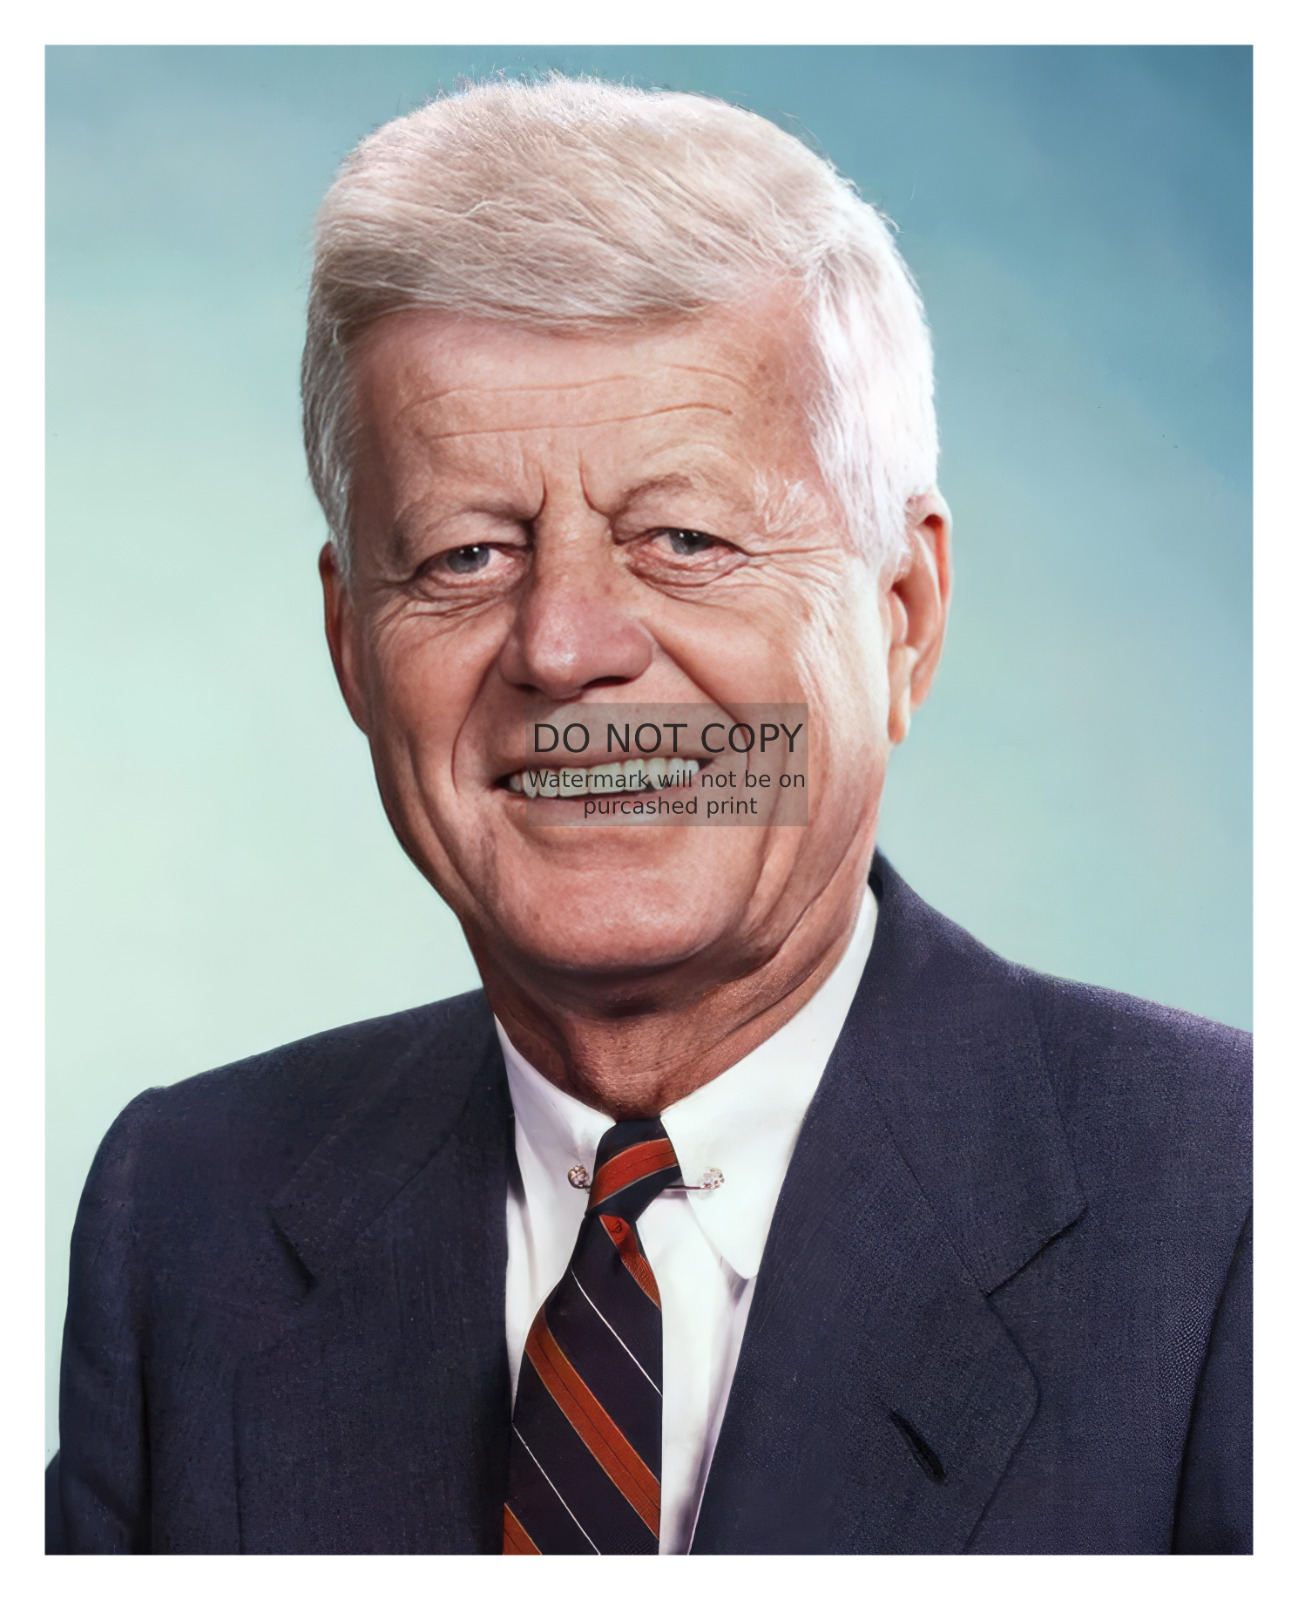 PRESIDENT JOHN F. KENNEDY IF HE HAD LIVED TO BE OLD 8X10 FANTASY PHOTO